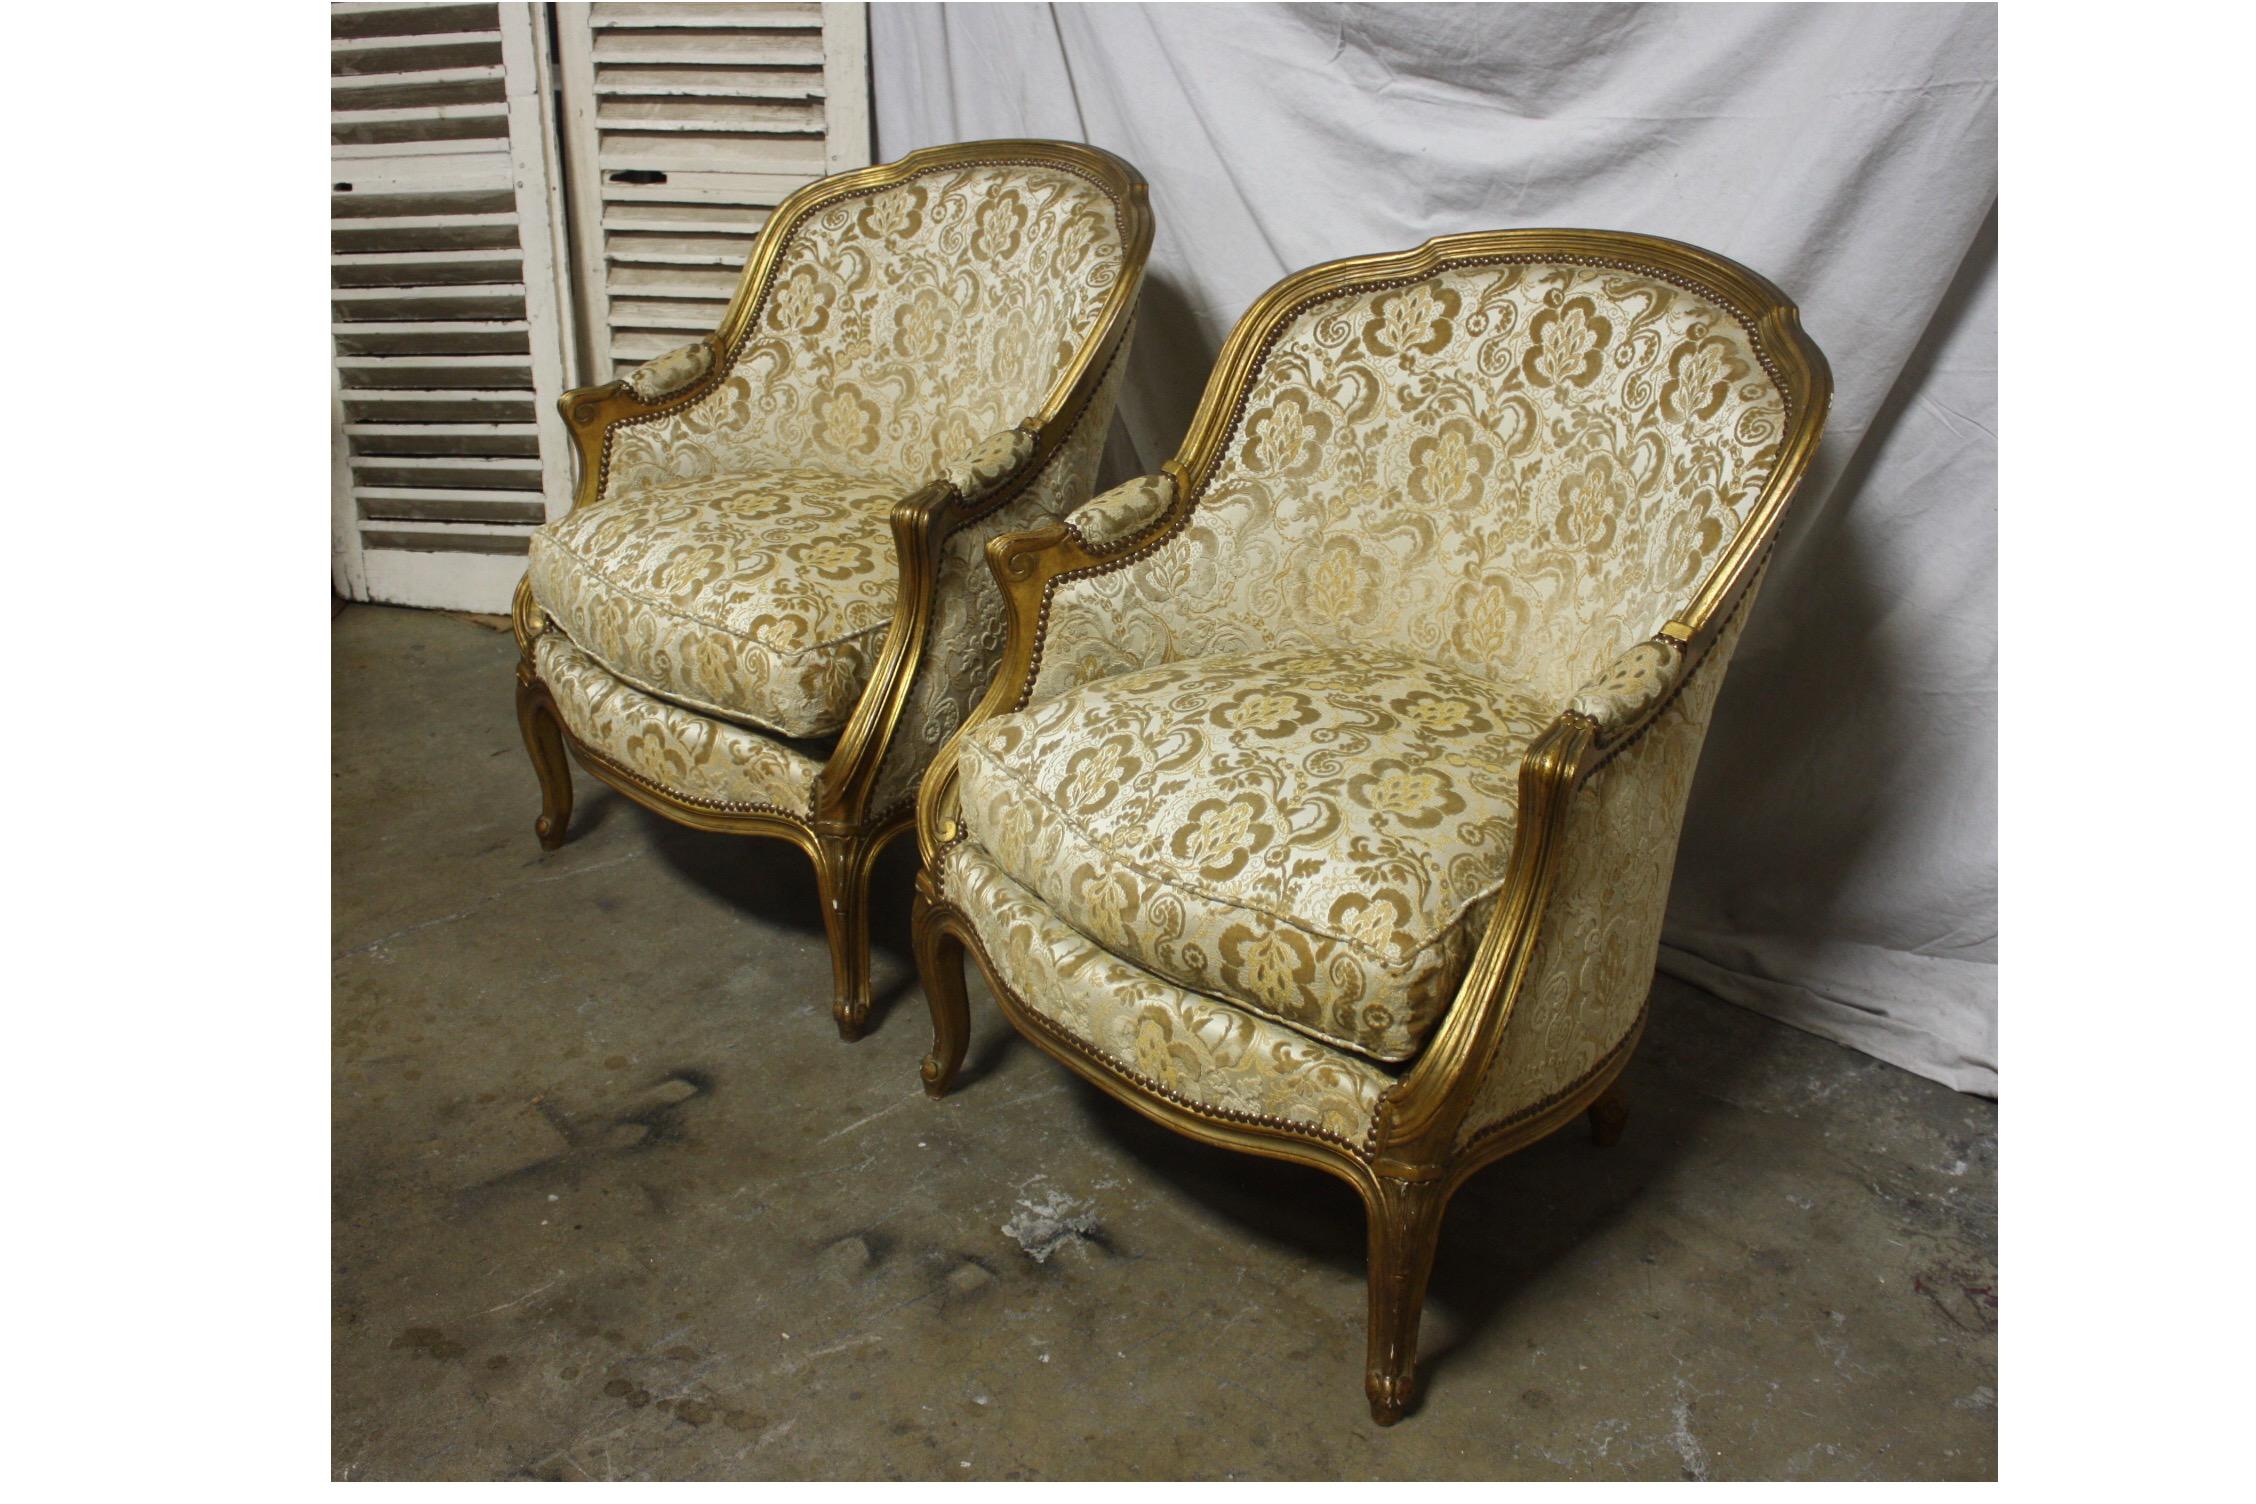 Late 19th century pair of French bergere chairs.